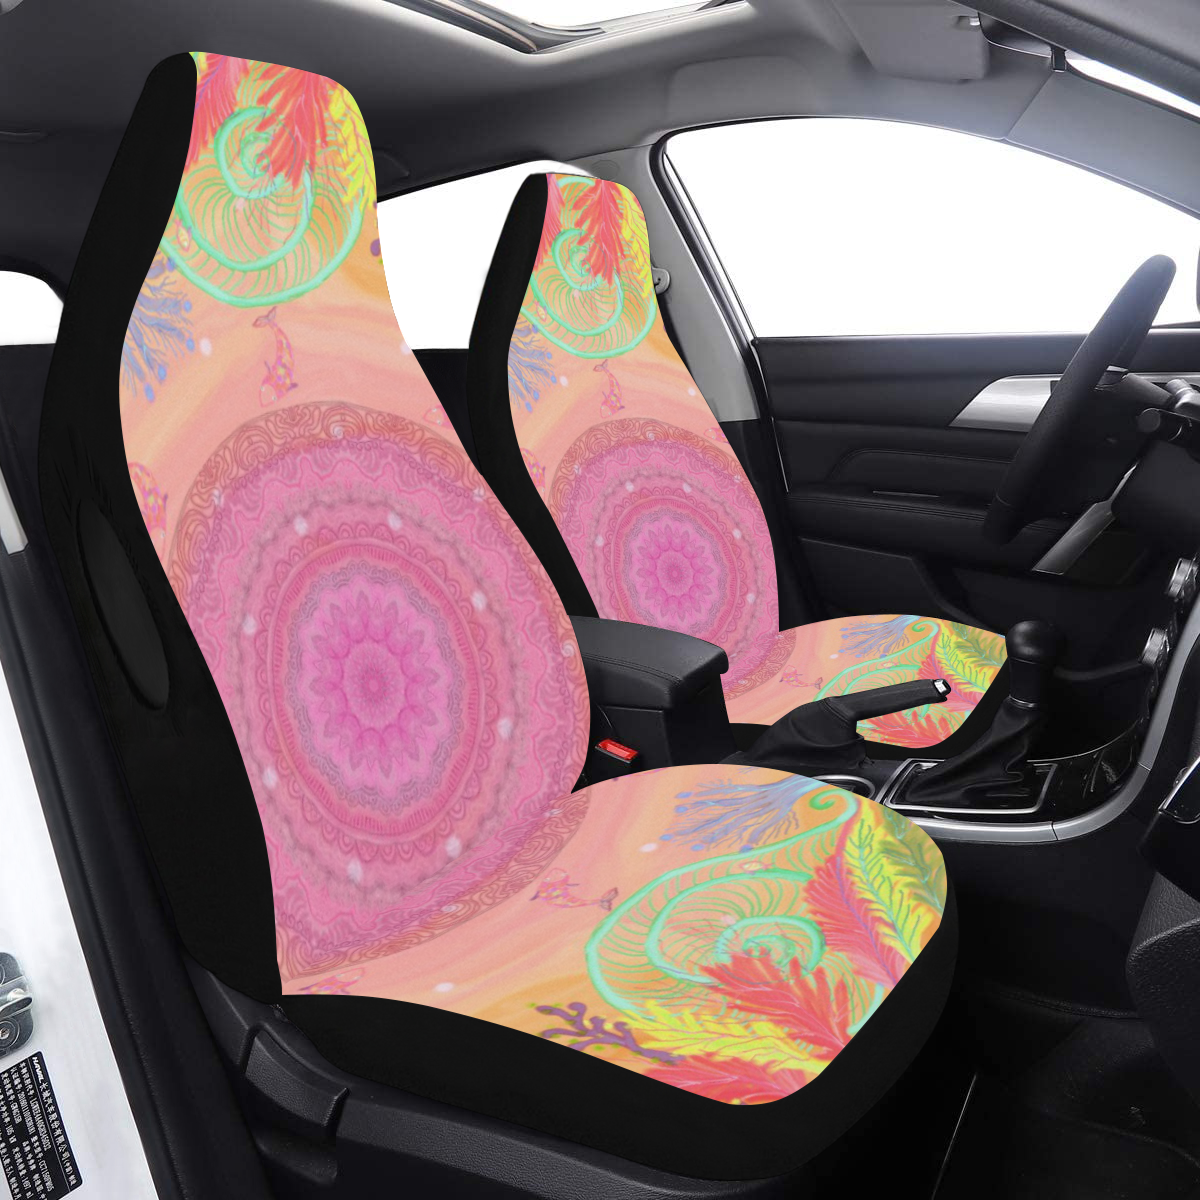 cosmos 4 Car Seat Cover Airbag Compatible (Set of 2)